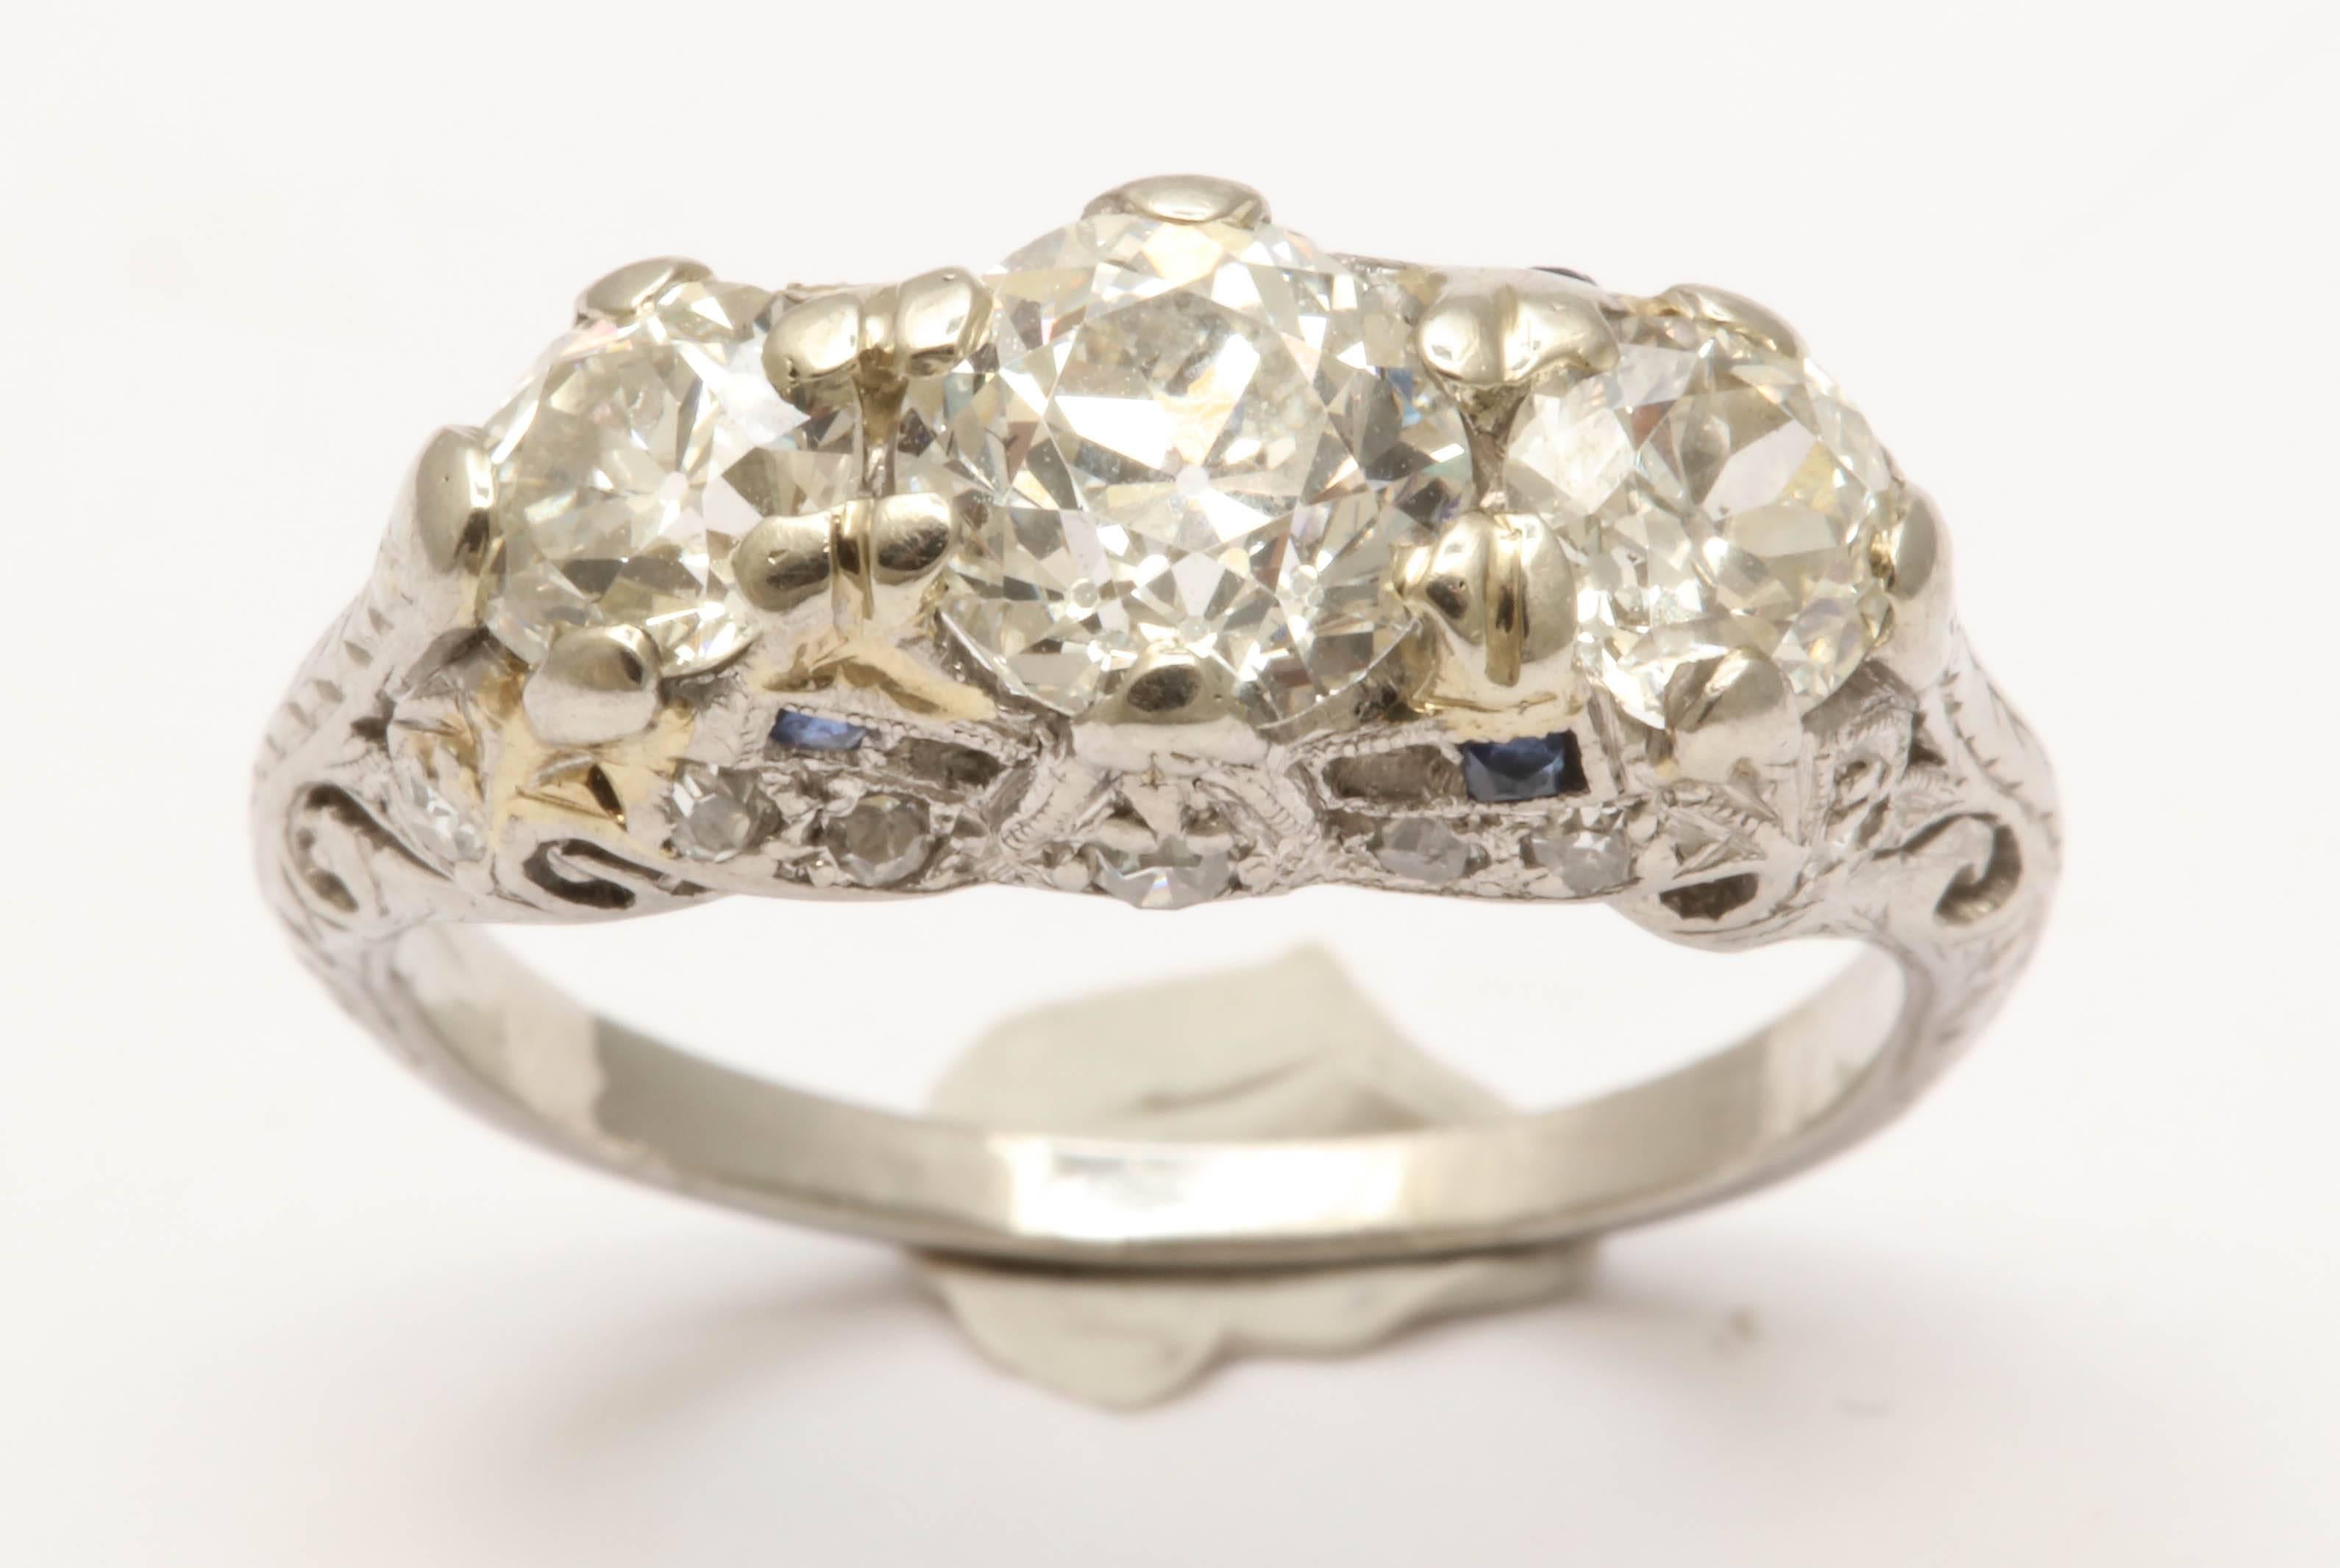 One Ladies Art Deco Three Stone Past,Present And Future Ring Embellished With Three Old European Cut : Center Stone Approximate Weight = .90cts H-I Color VS2 Quality. Two Side Diamonds Approximate Weight .50Cts Each Stone With An approximate Color